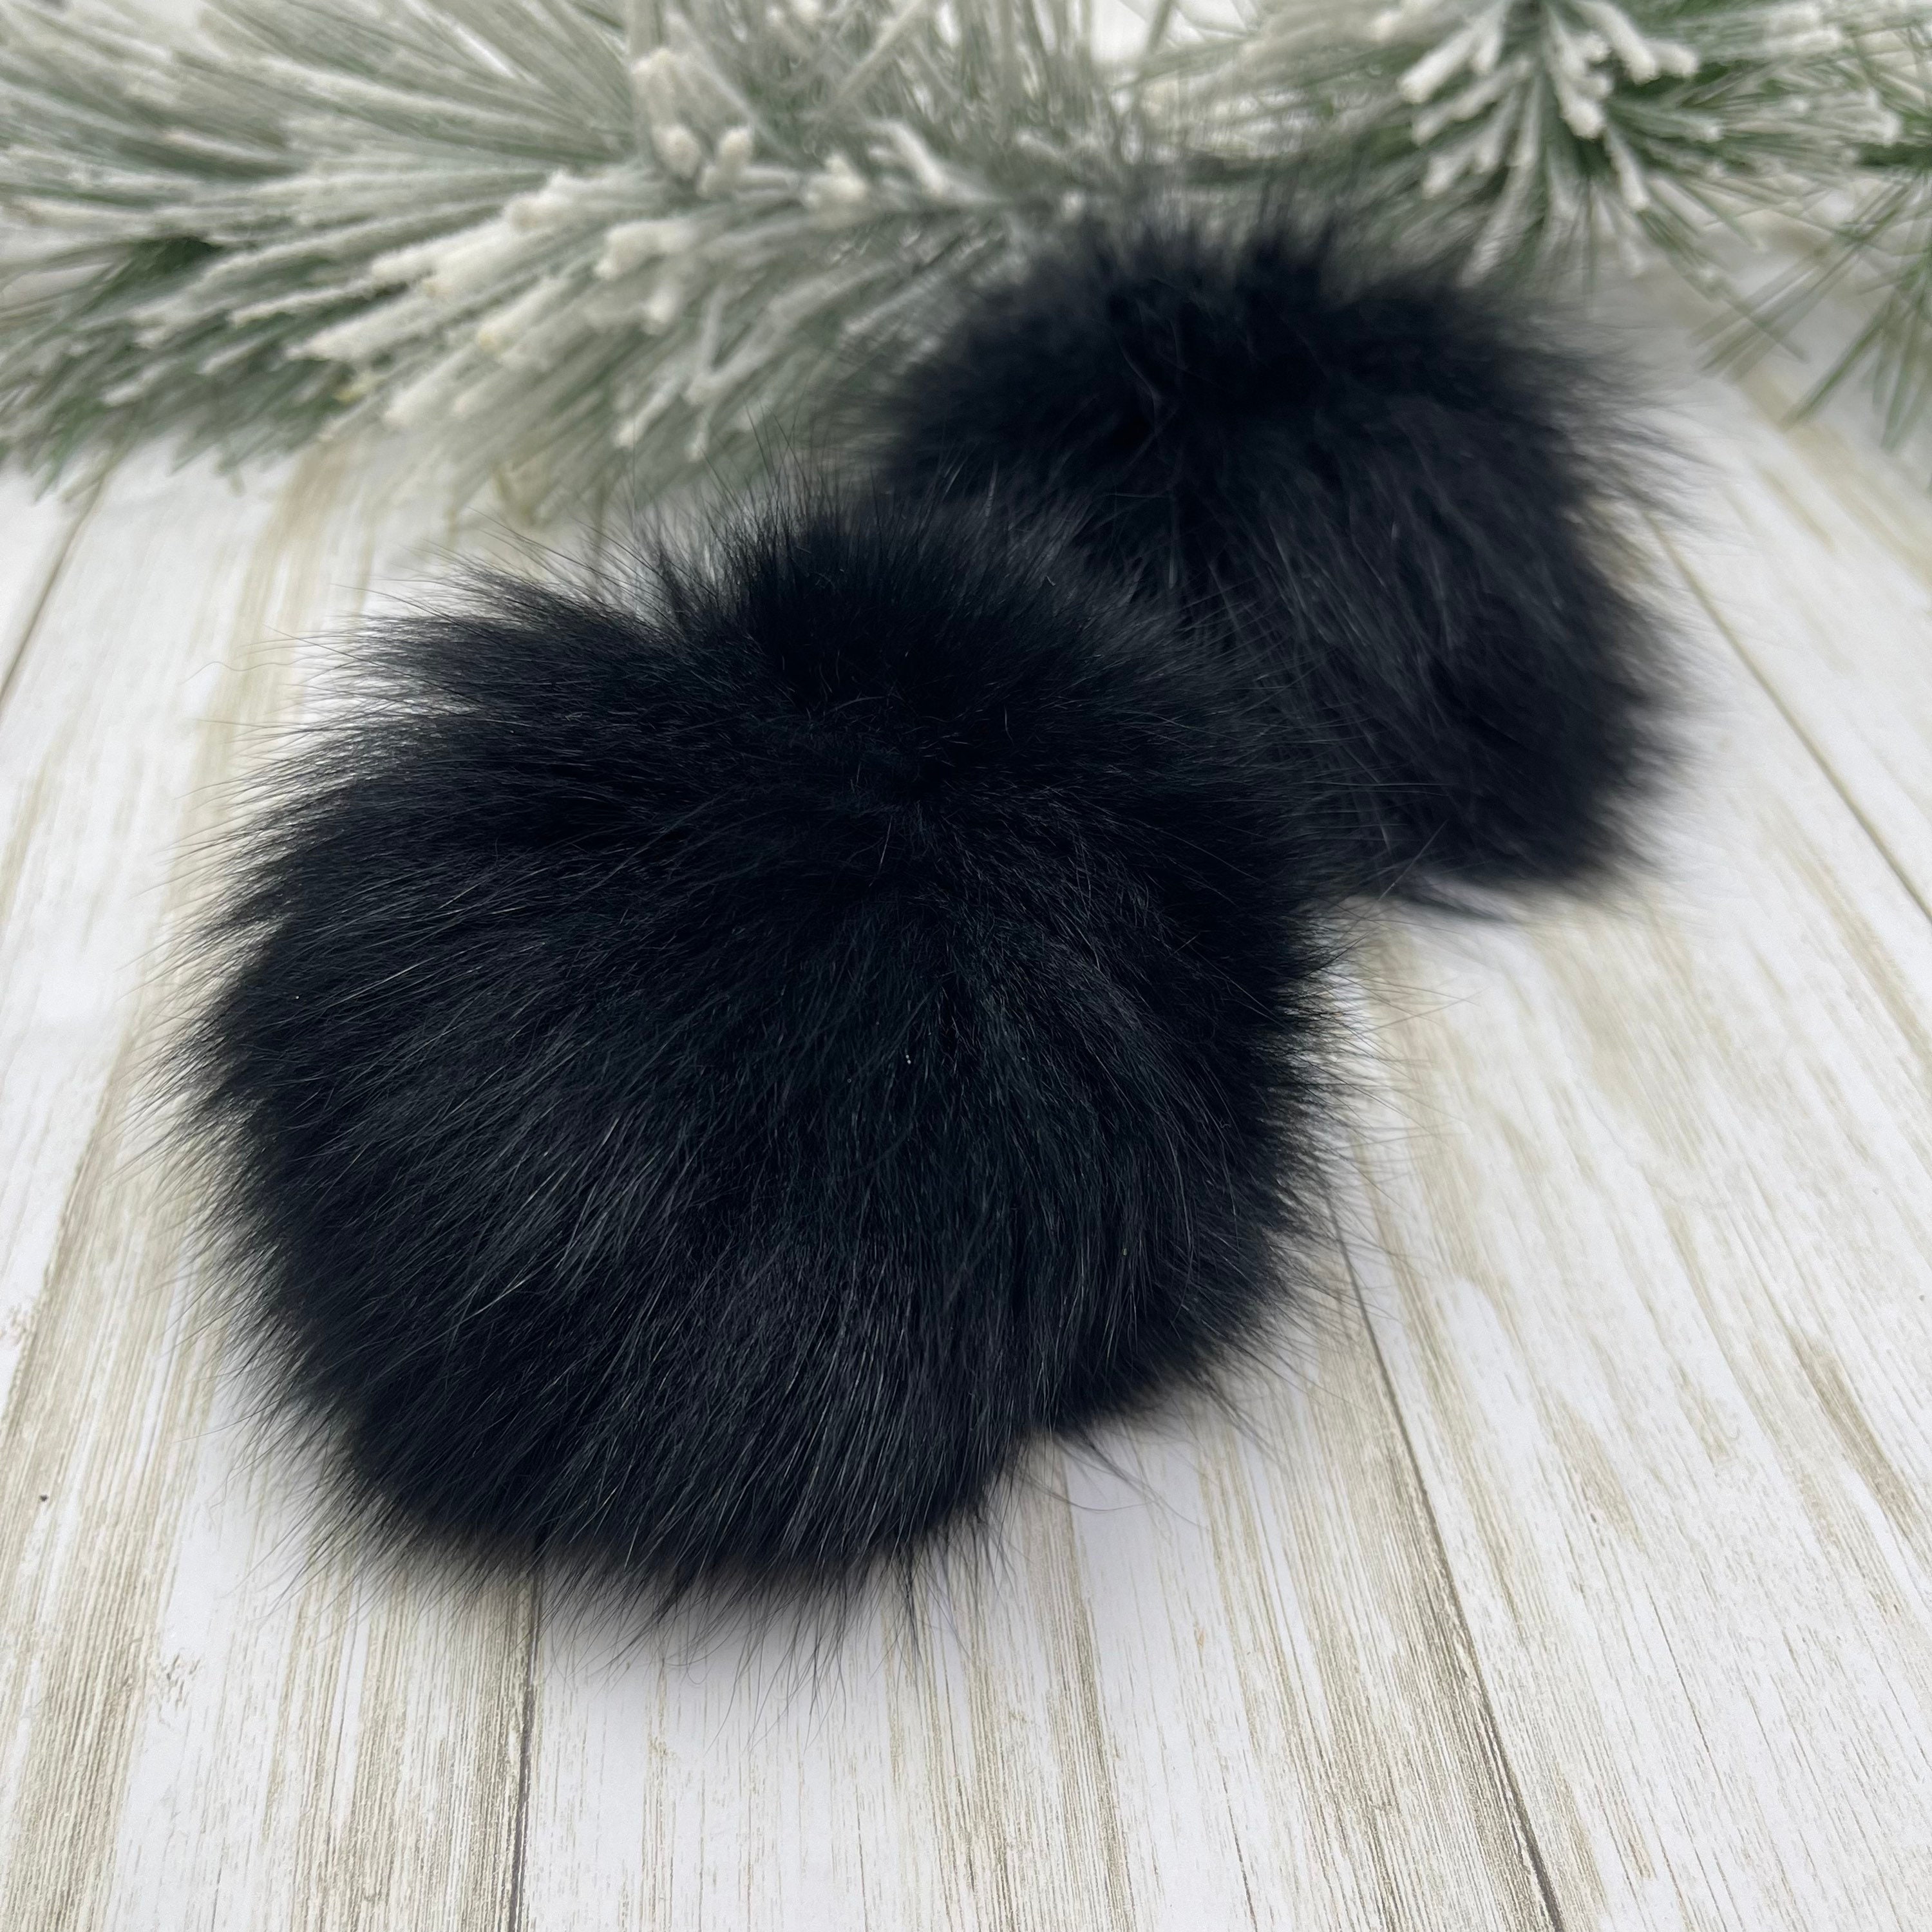 Eovea Shaggy Faux Fur Fabric by the Yard Black 36 X 60 Inches Soft&fluffy  Craft Fabric DIY Craft Supply, Hobby, Costume, Decoration 